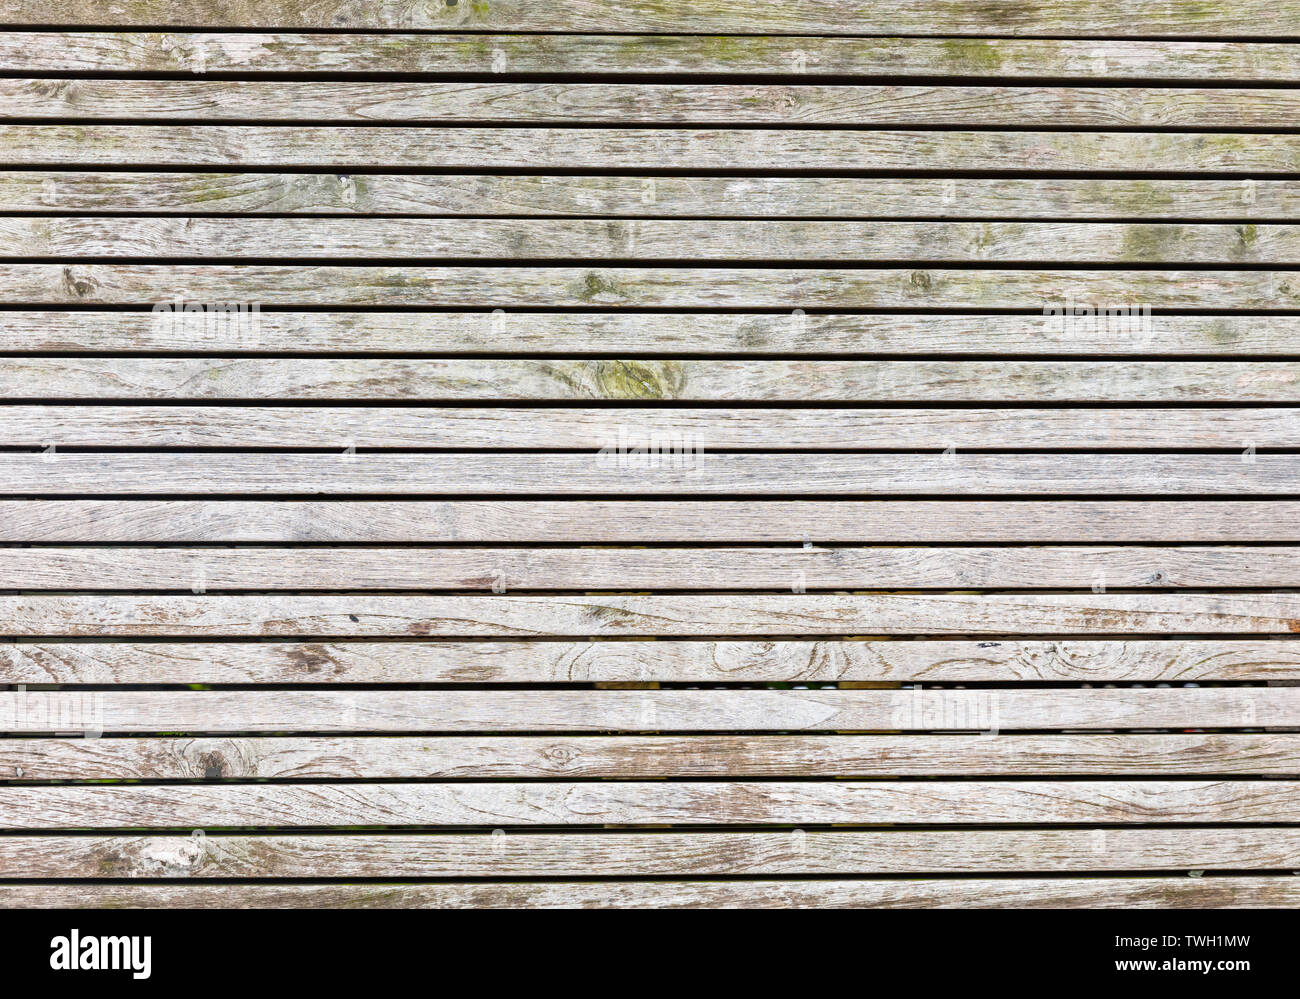 Wooden planks, natural color, floor or wall, horizontal stripes, texture, background Stock Photo